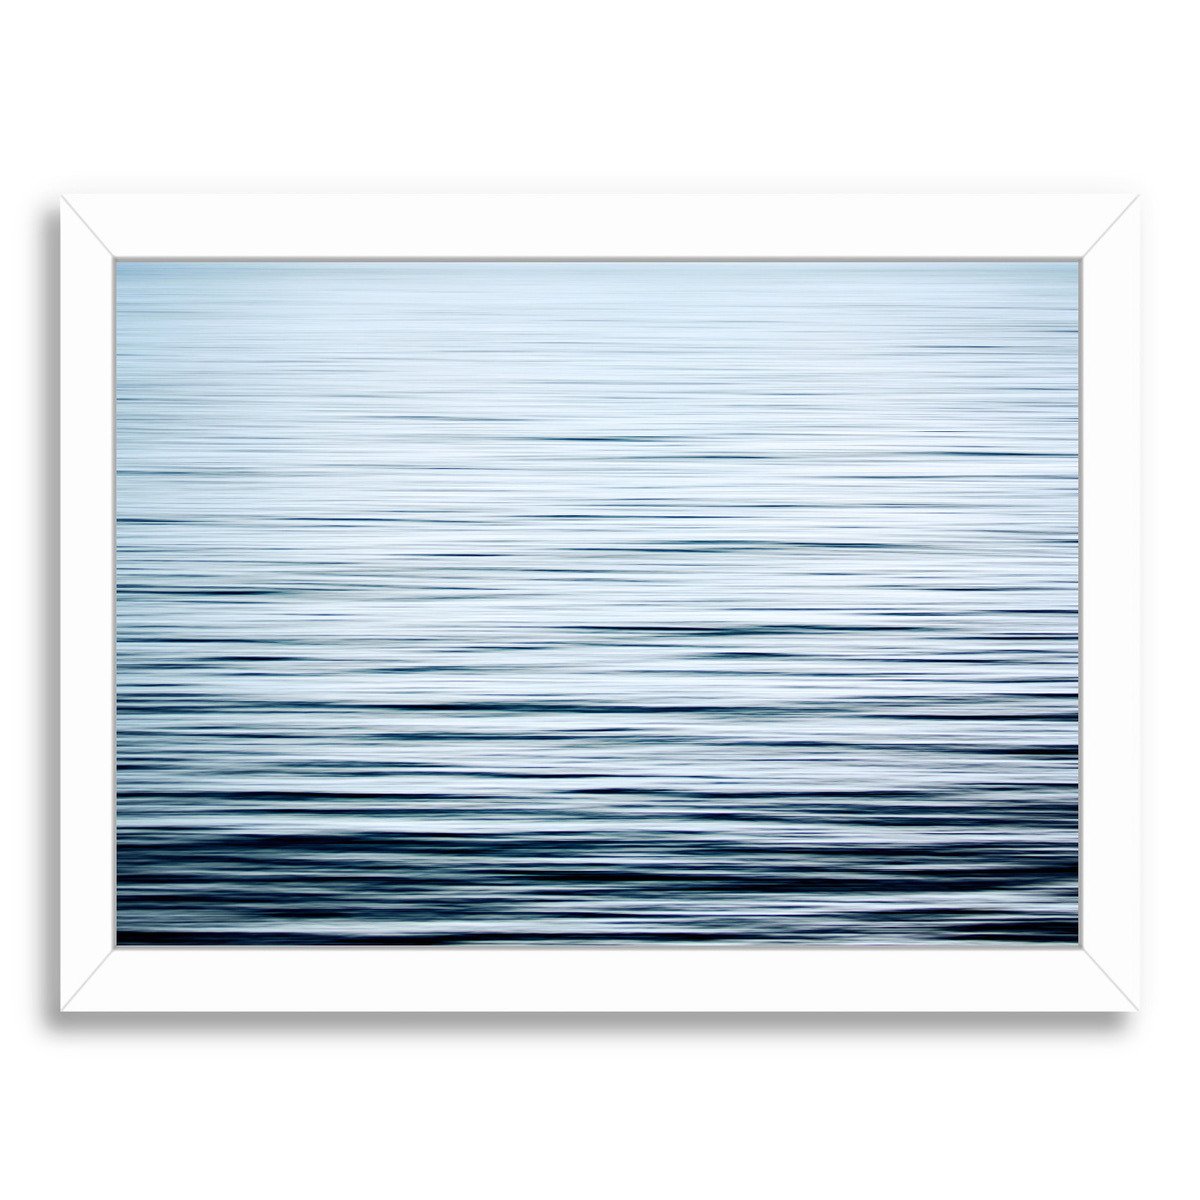 Liquid Blue Sea By The Gingham Owl - Framed Print - Americanflat